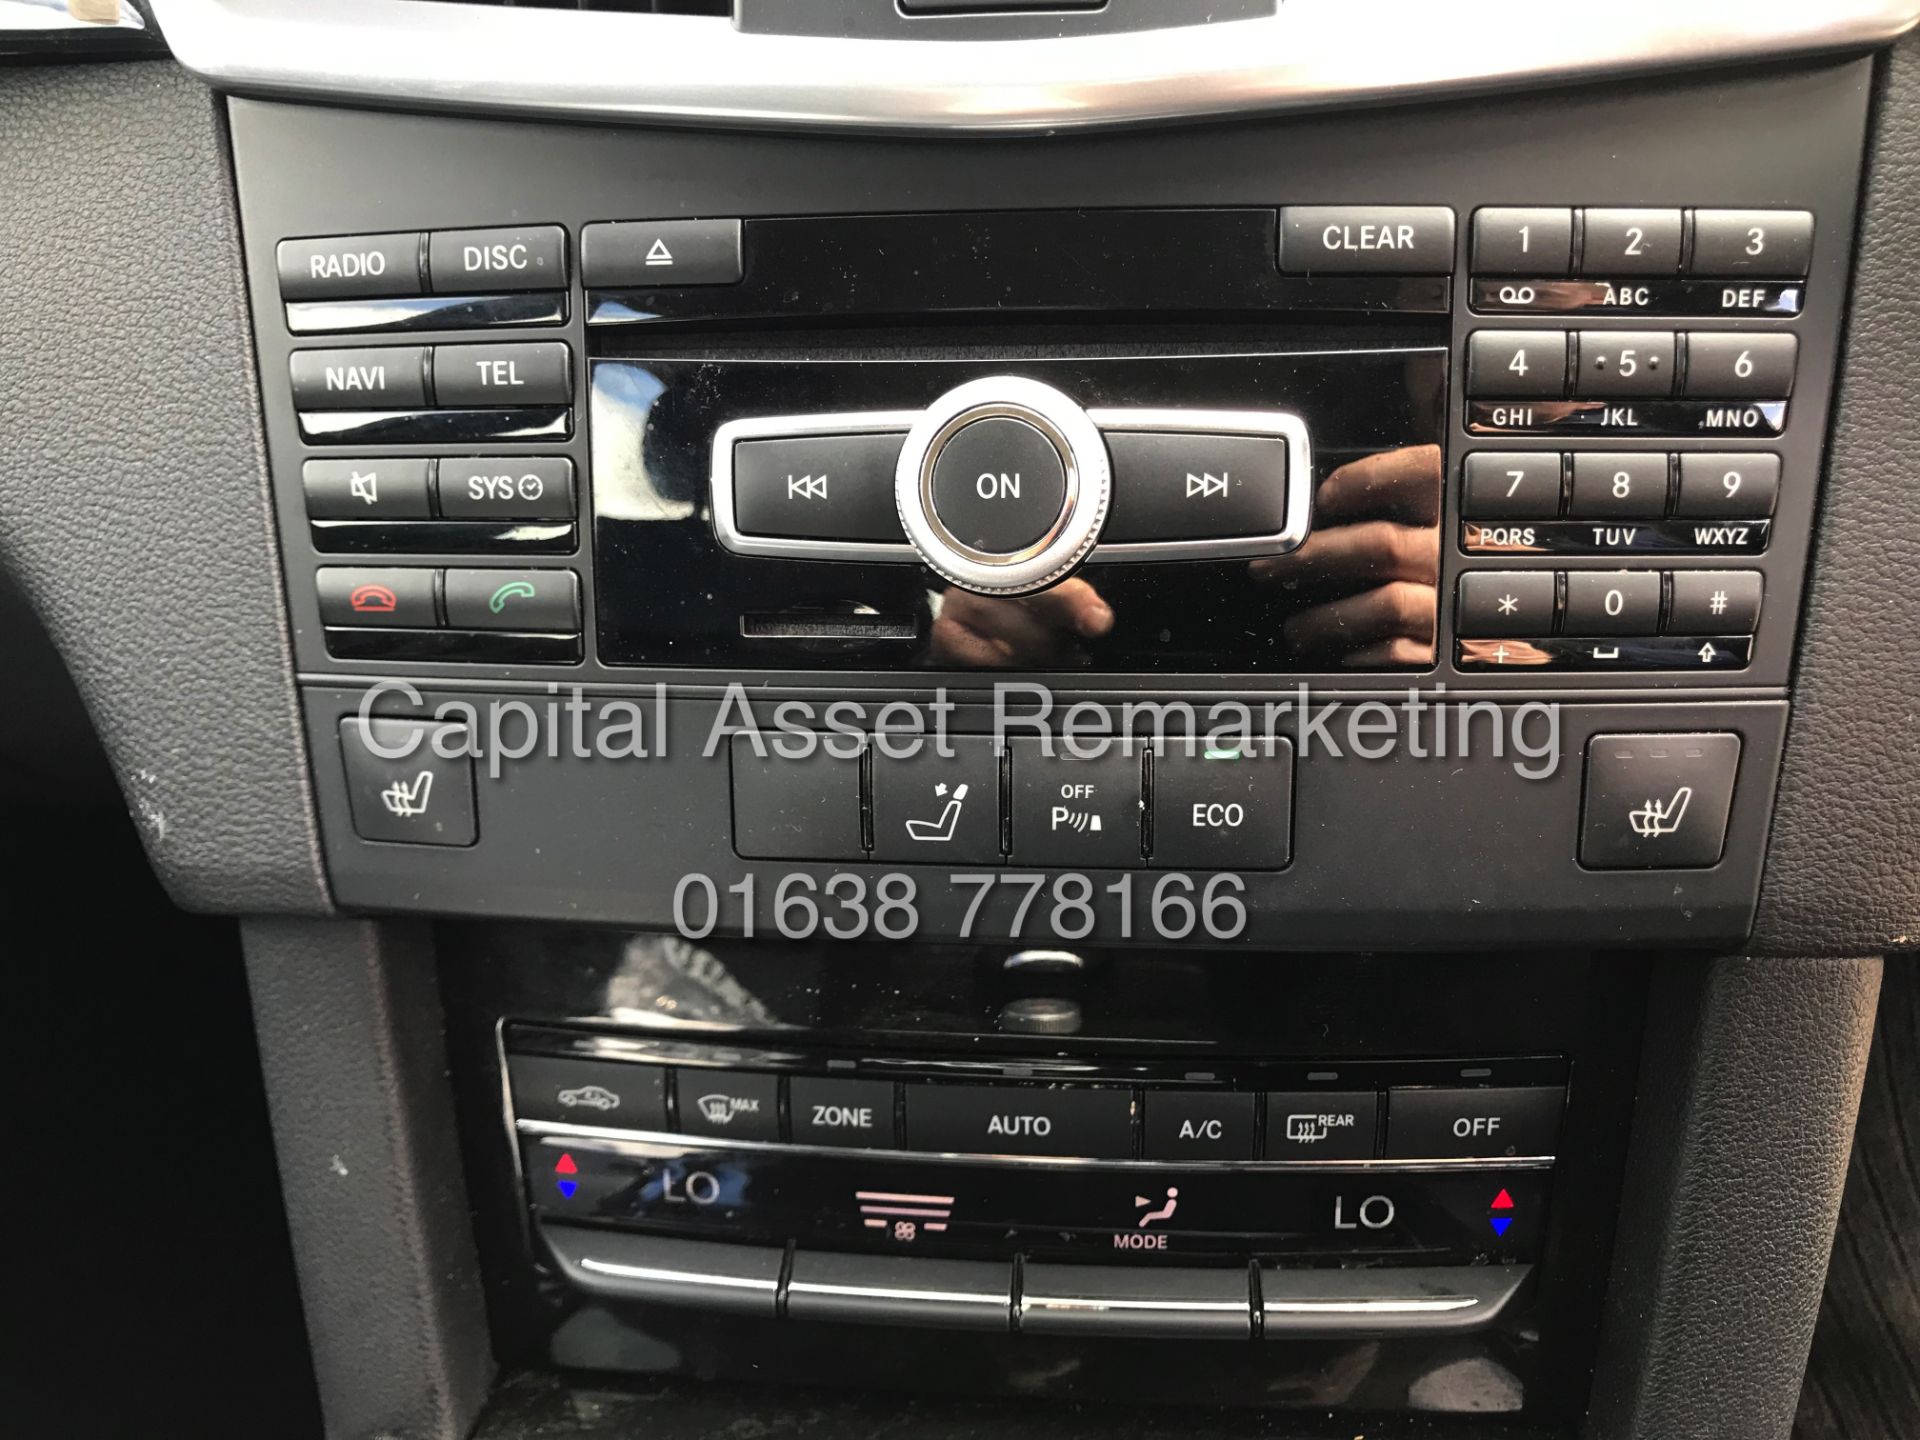 MERCEDES E220d 7G AUTO "EXECUTIVE - SPECIAL EQUIPMENT" SAT NAV - LEATHER - CLIMATE - CRUISE - Image 15 of 20